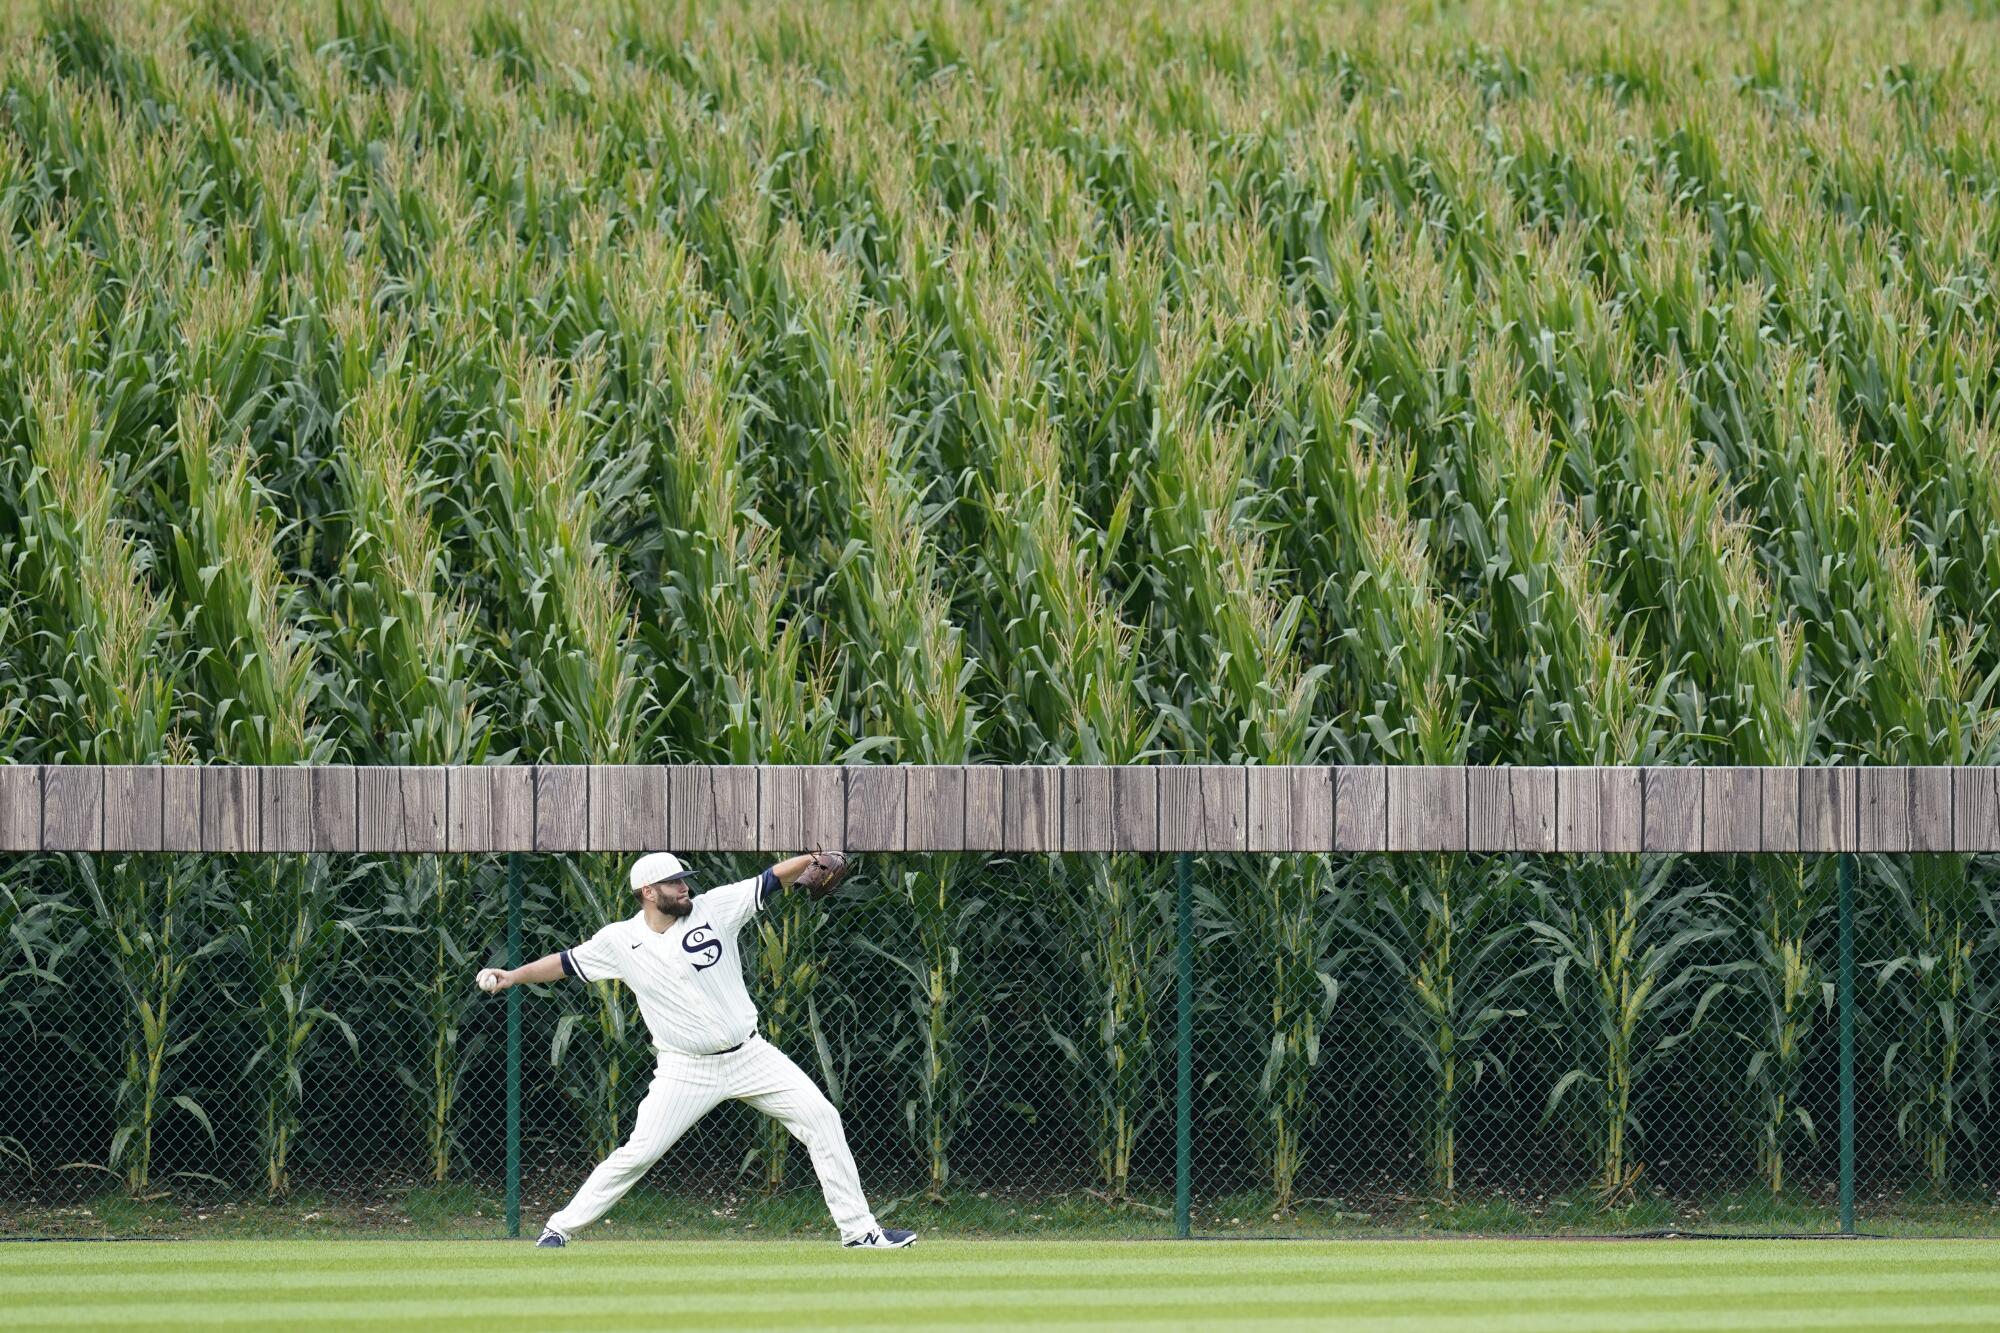 Take me out to the cornfield: See the Field of Dreams back in